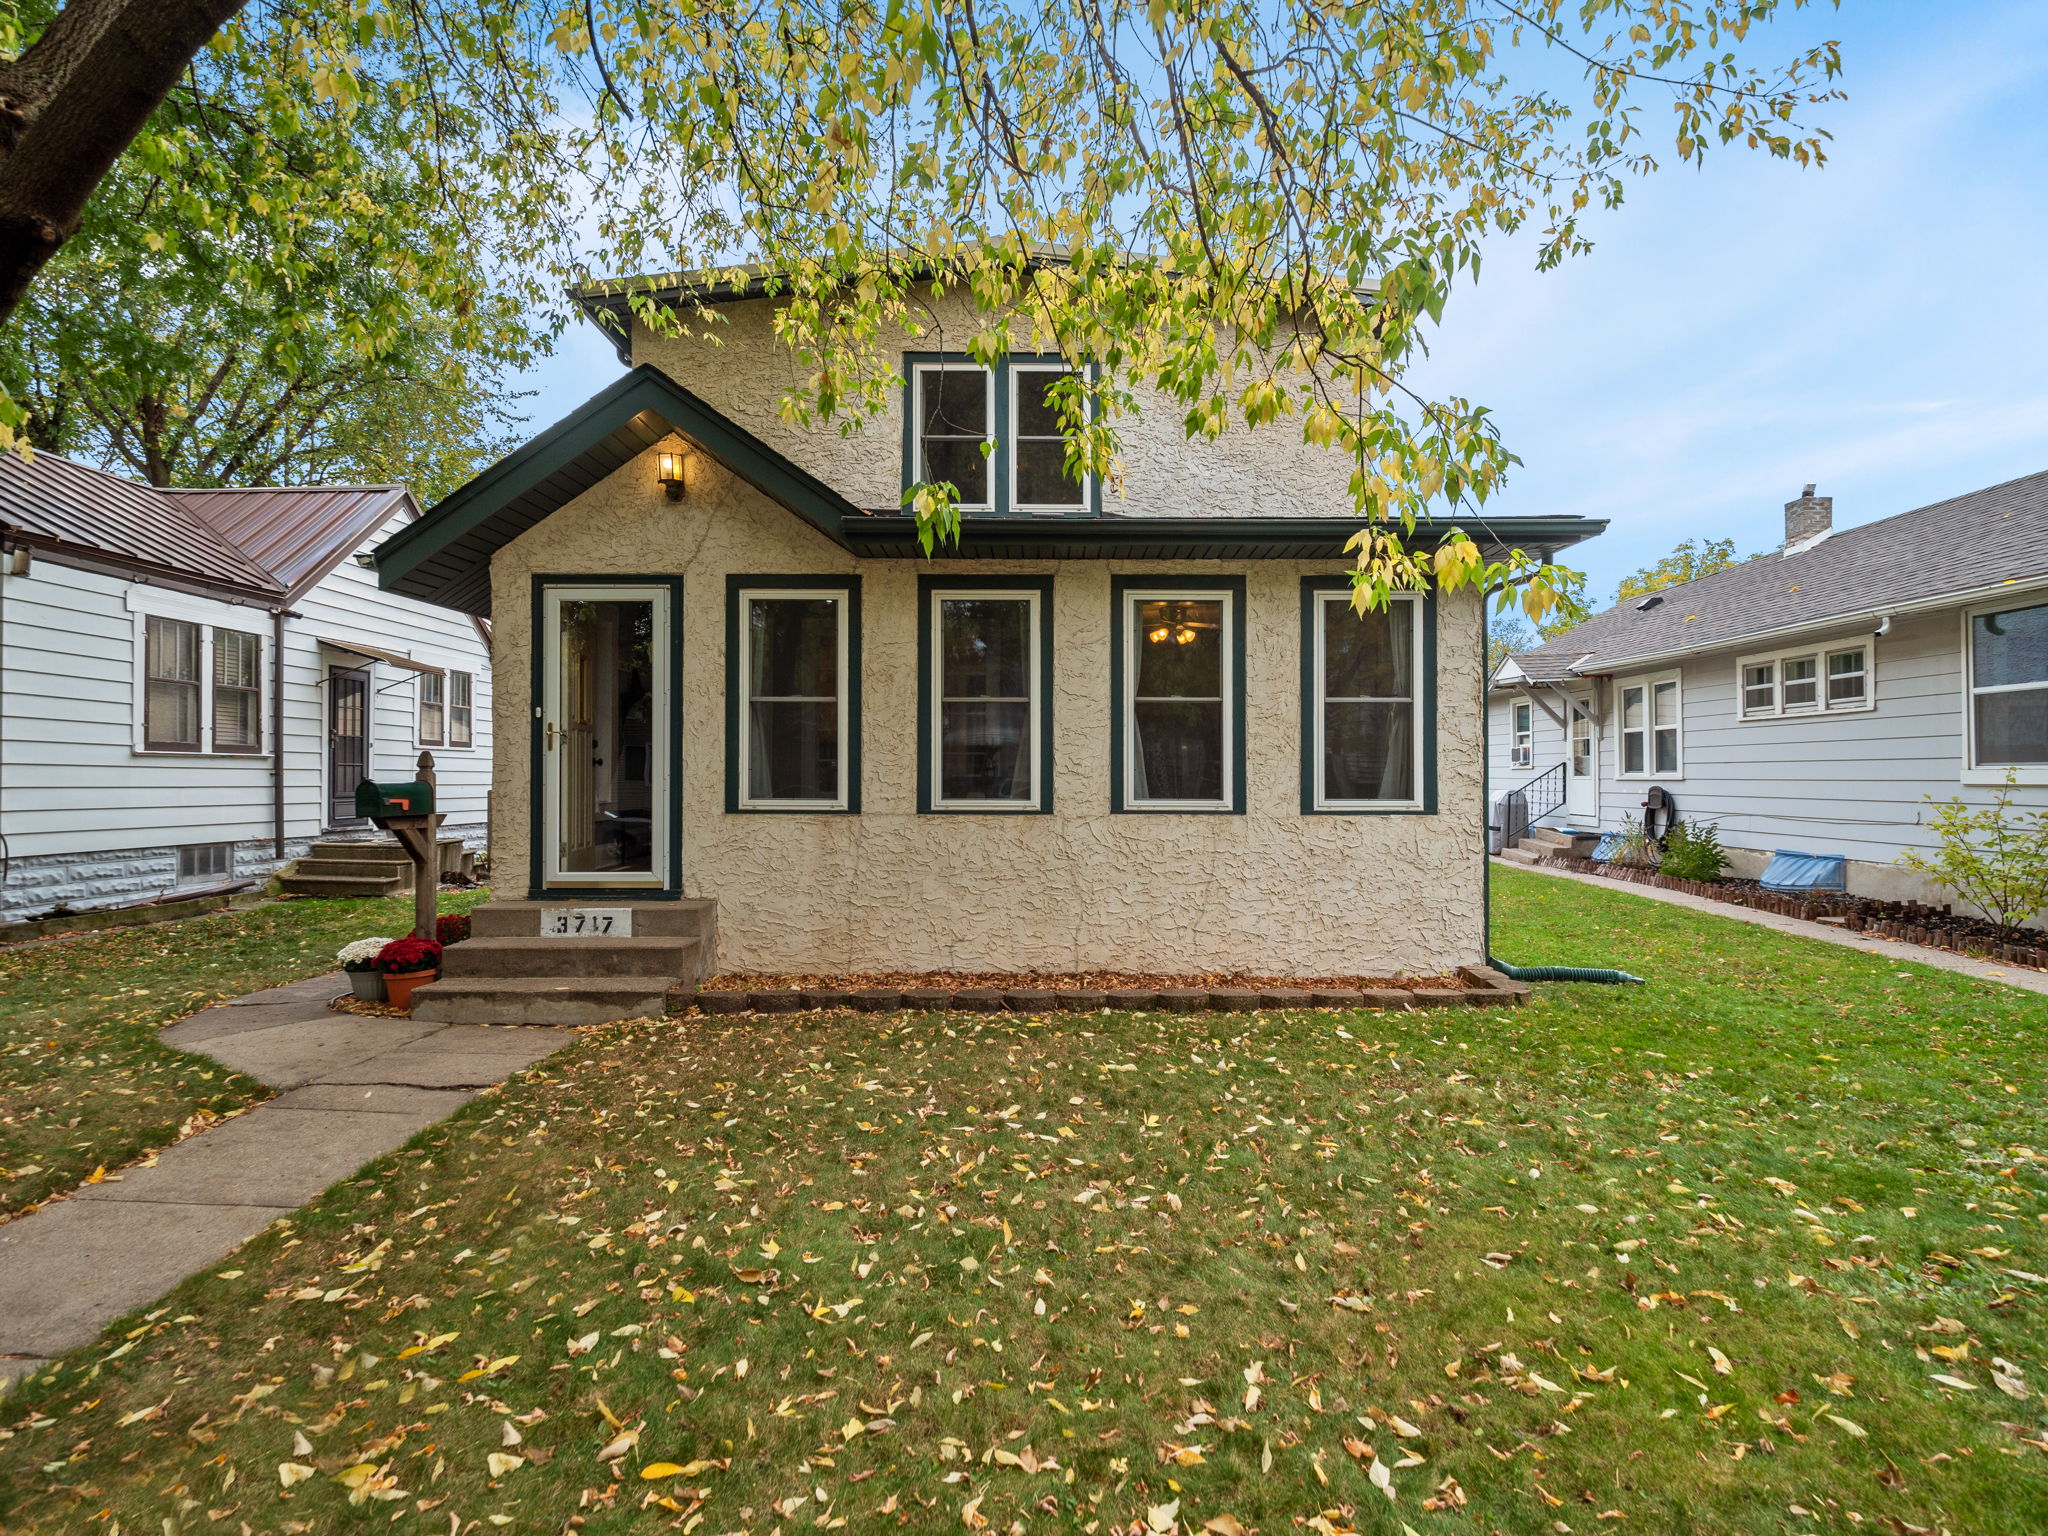  3717 Orchard Ave N, Robbinsdale, MN 55422, US Photo 28